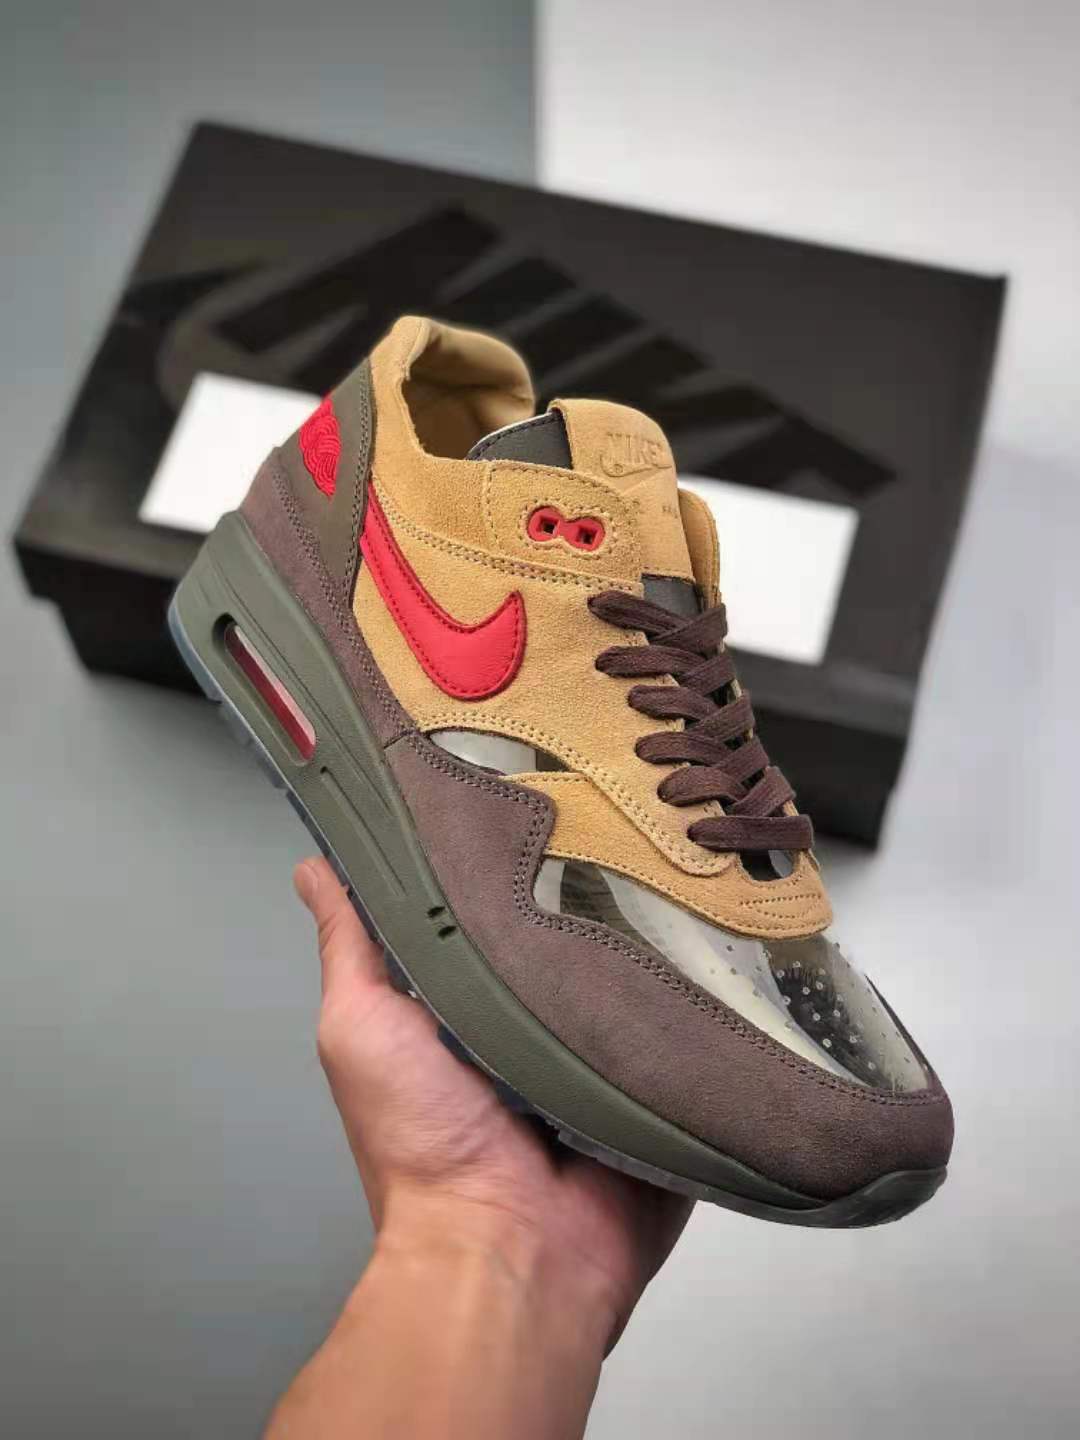 CLOT x Nike Air Max 1 'Kiss Of Death CHA' DD1870-200 - Limited Edition Collaboration Sneakers